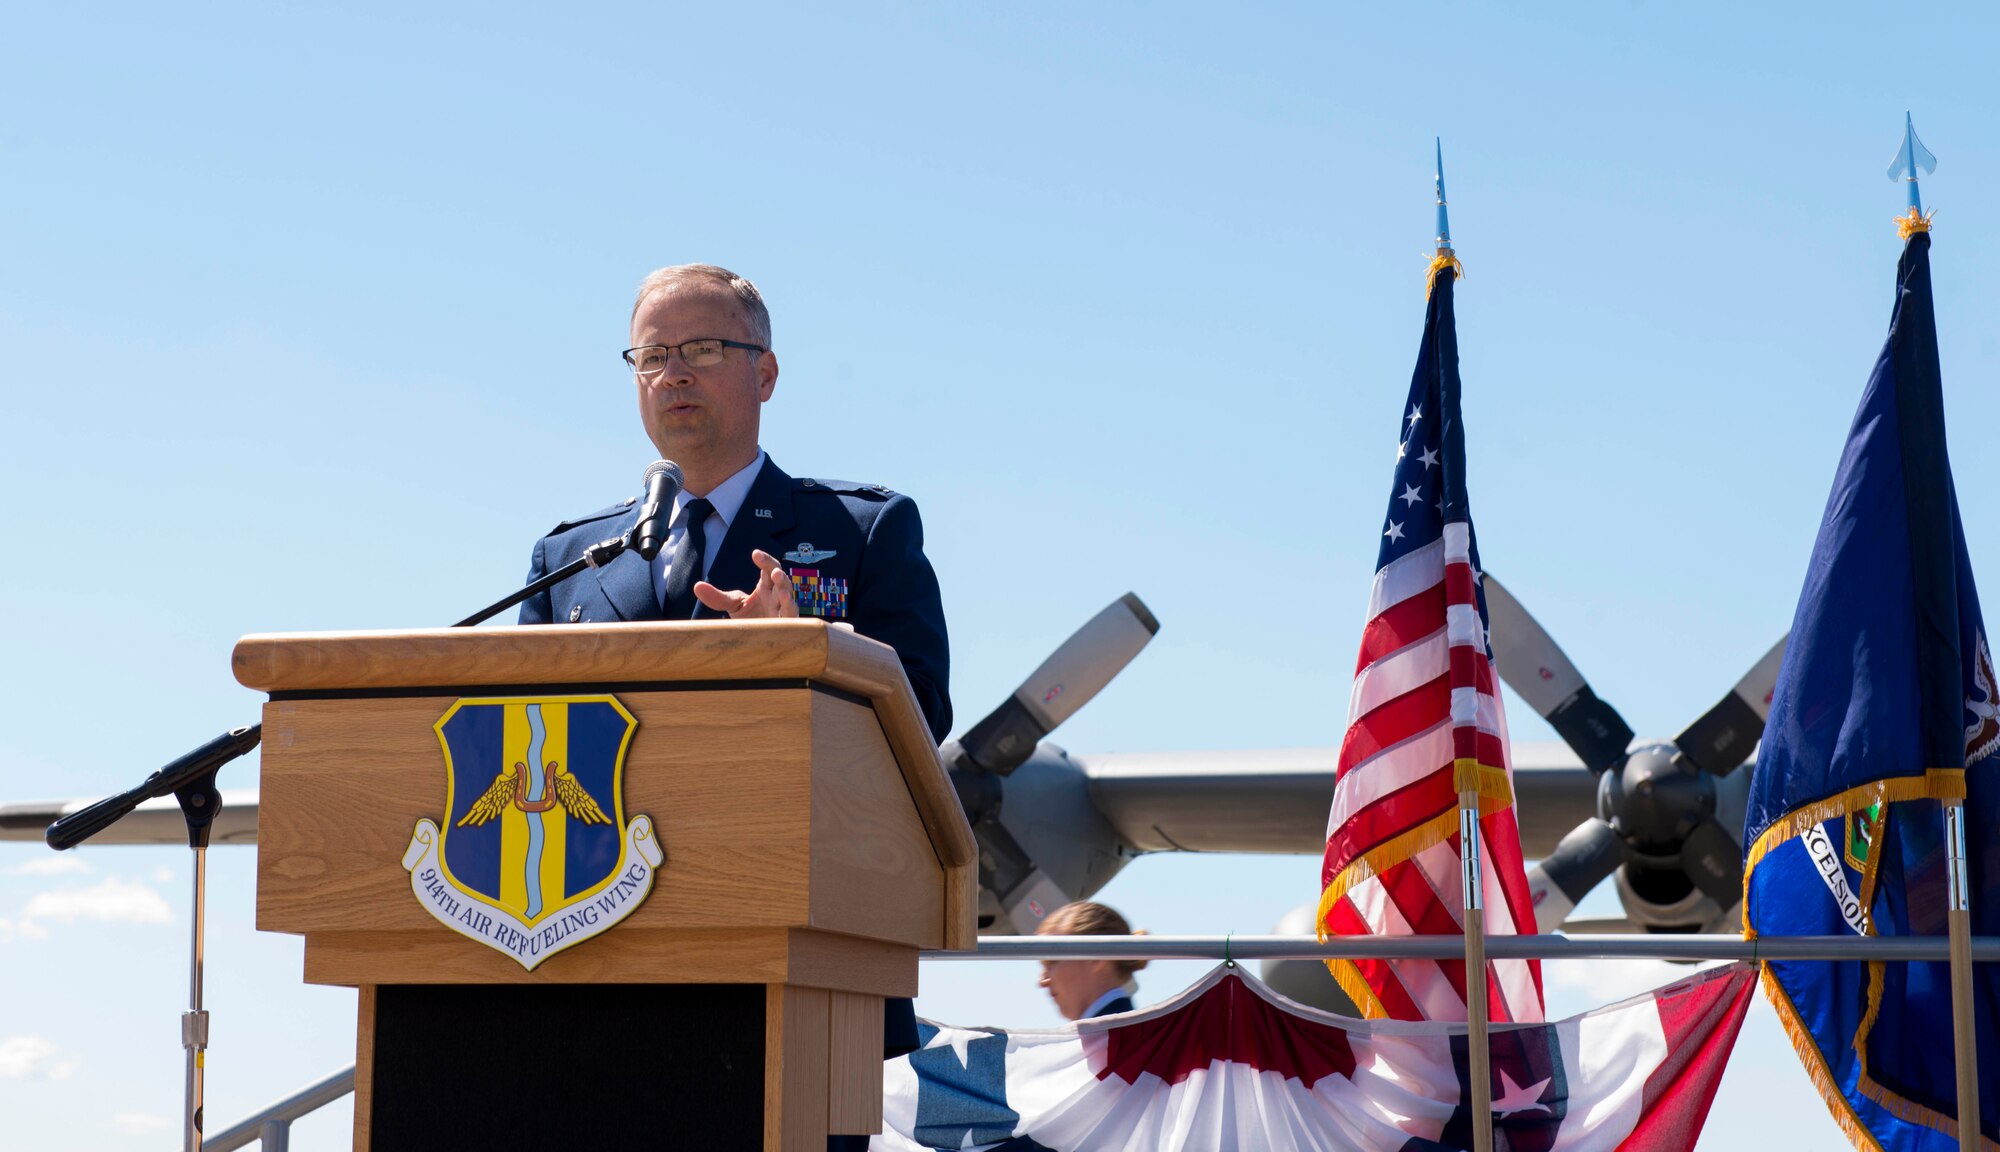 Col. Brian S. Bowman, 914th Air Refueling Wing Commander, addresses the crowd during the Change of Mission Ceremony, June 3, 2017, Niagara Falls Air Reserve Station, N.Y. This transition marks the end of a 46-year mission as an Airlift Wing, flying the C-130 aircraft. Under the new mission, the 914th will be flying the KC-135 Statotanker (U.S. Air Force photo by Tech. Sgt. Stephanie Sawyer) 